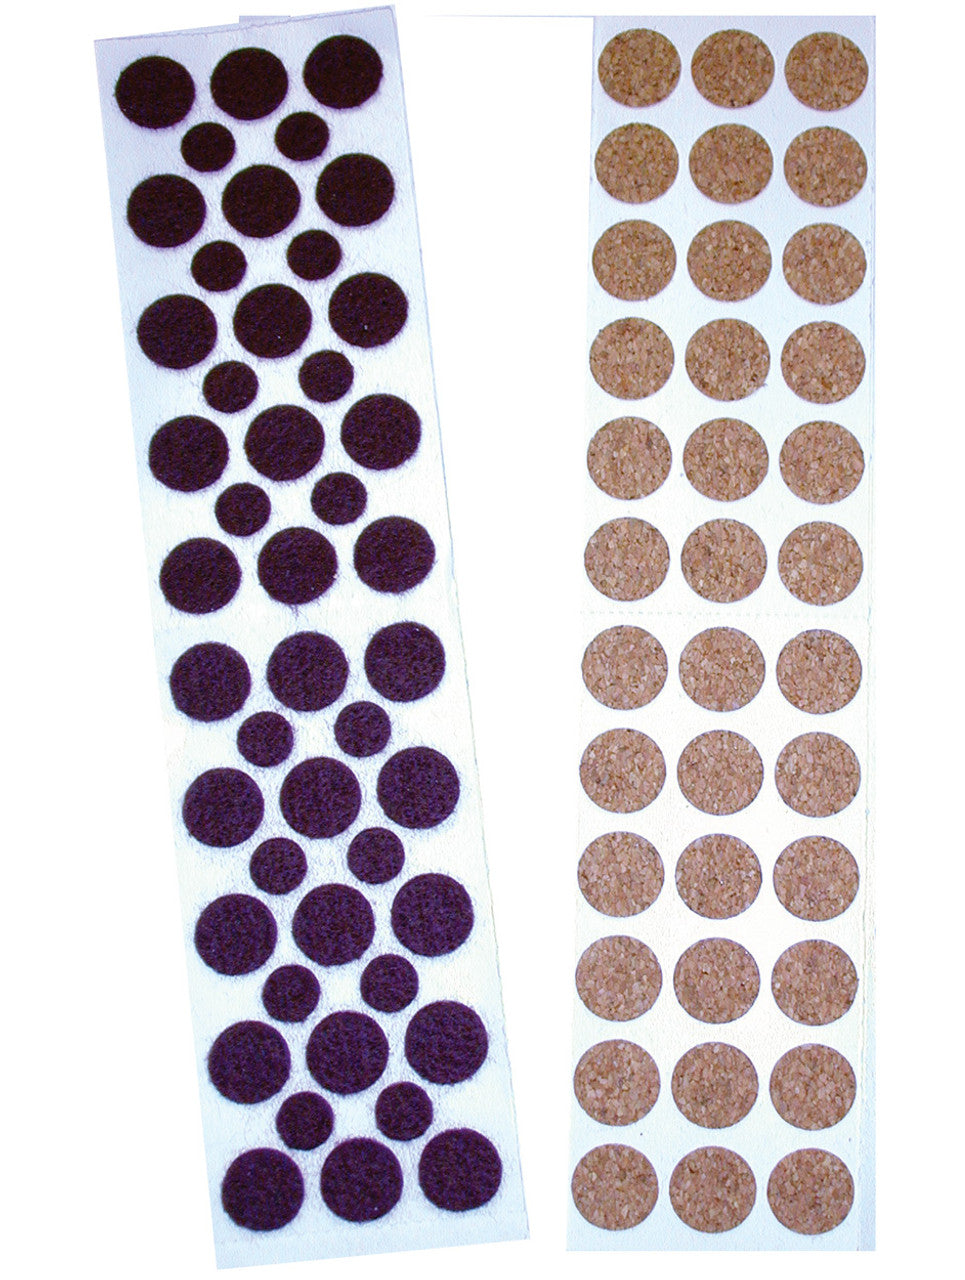 This diverse Variety Texture Stickers-Felt package includes 46 brown felt and 36 cork round flat stick-on. The considerable stick-on measure .50 inches; the small ones are .25 inches in diameter.